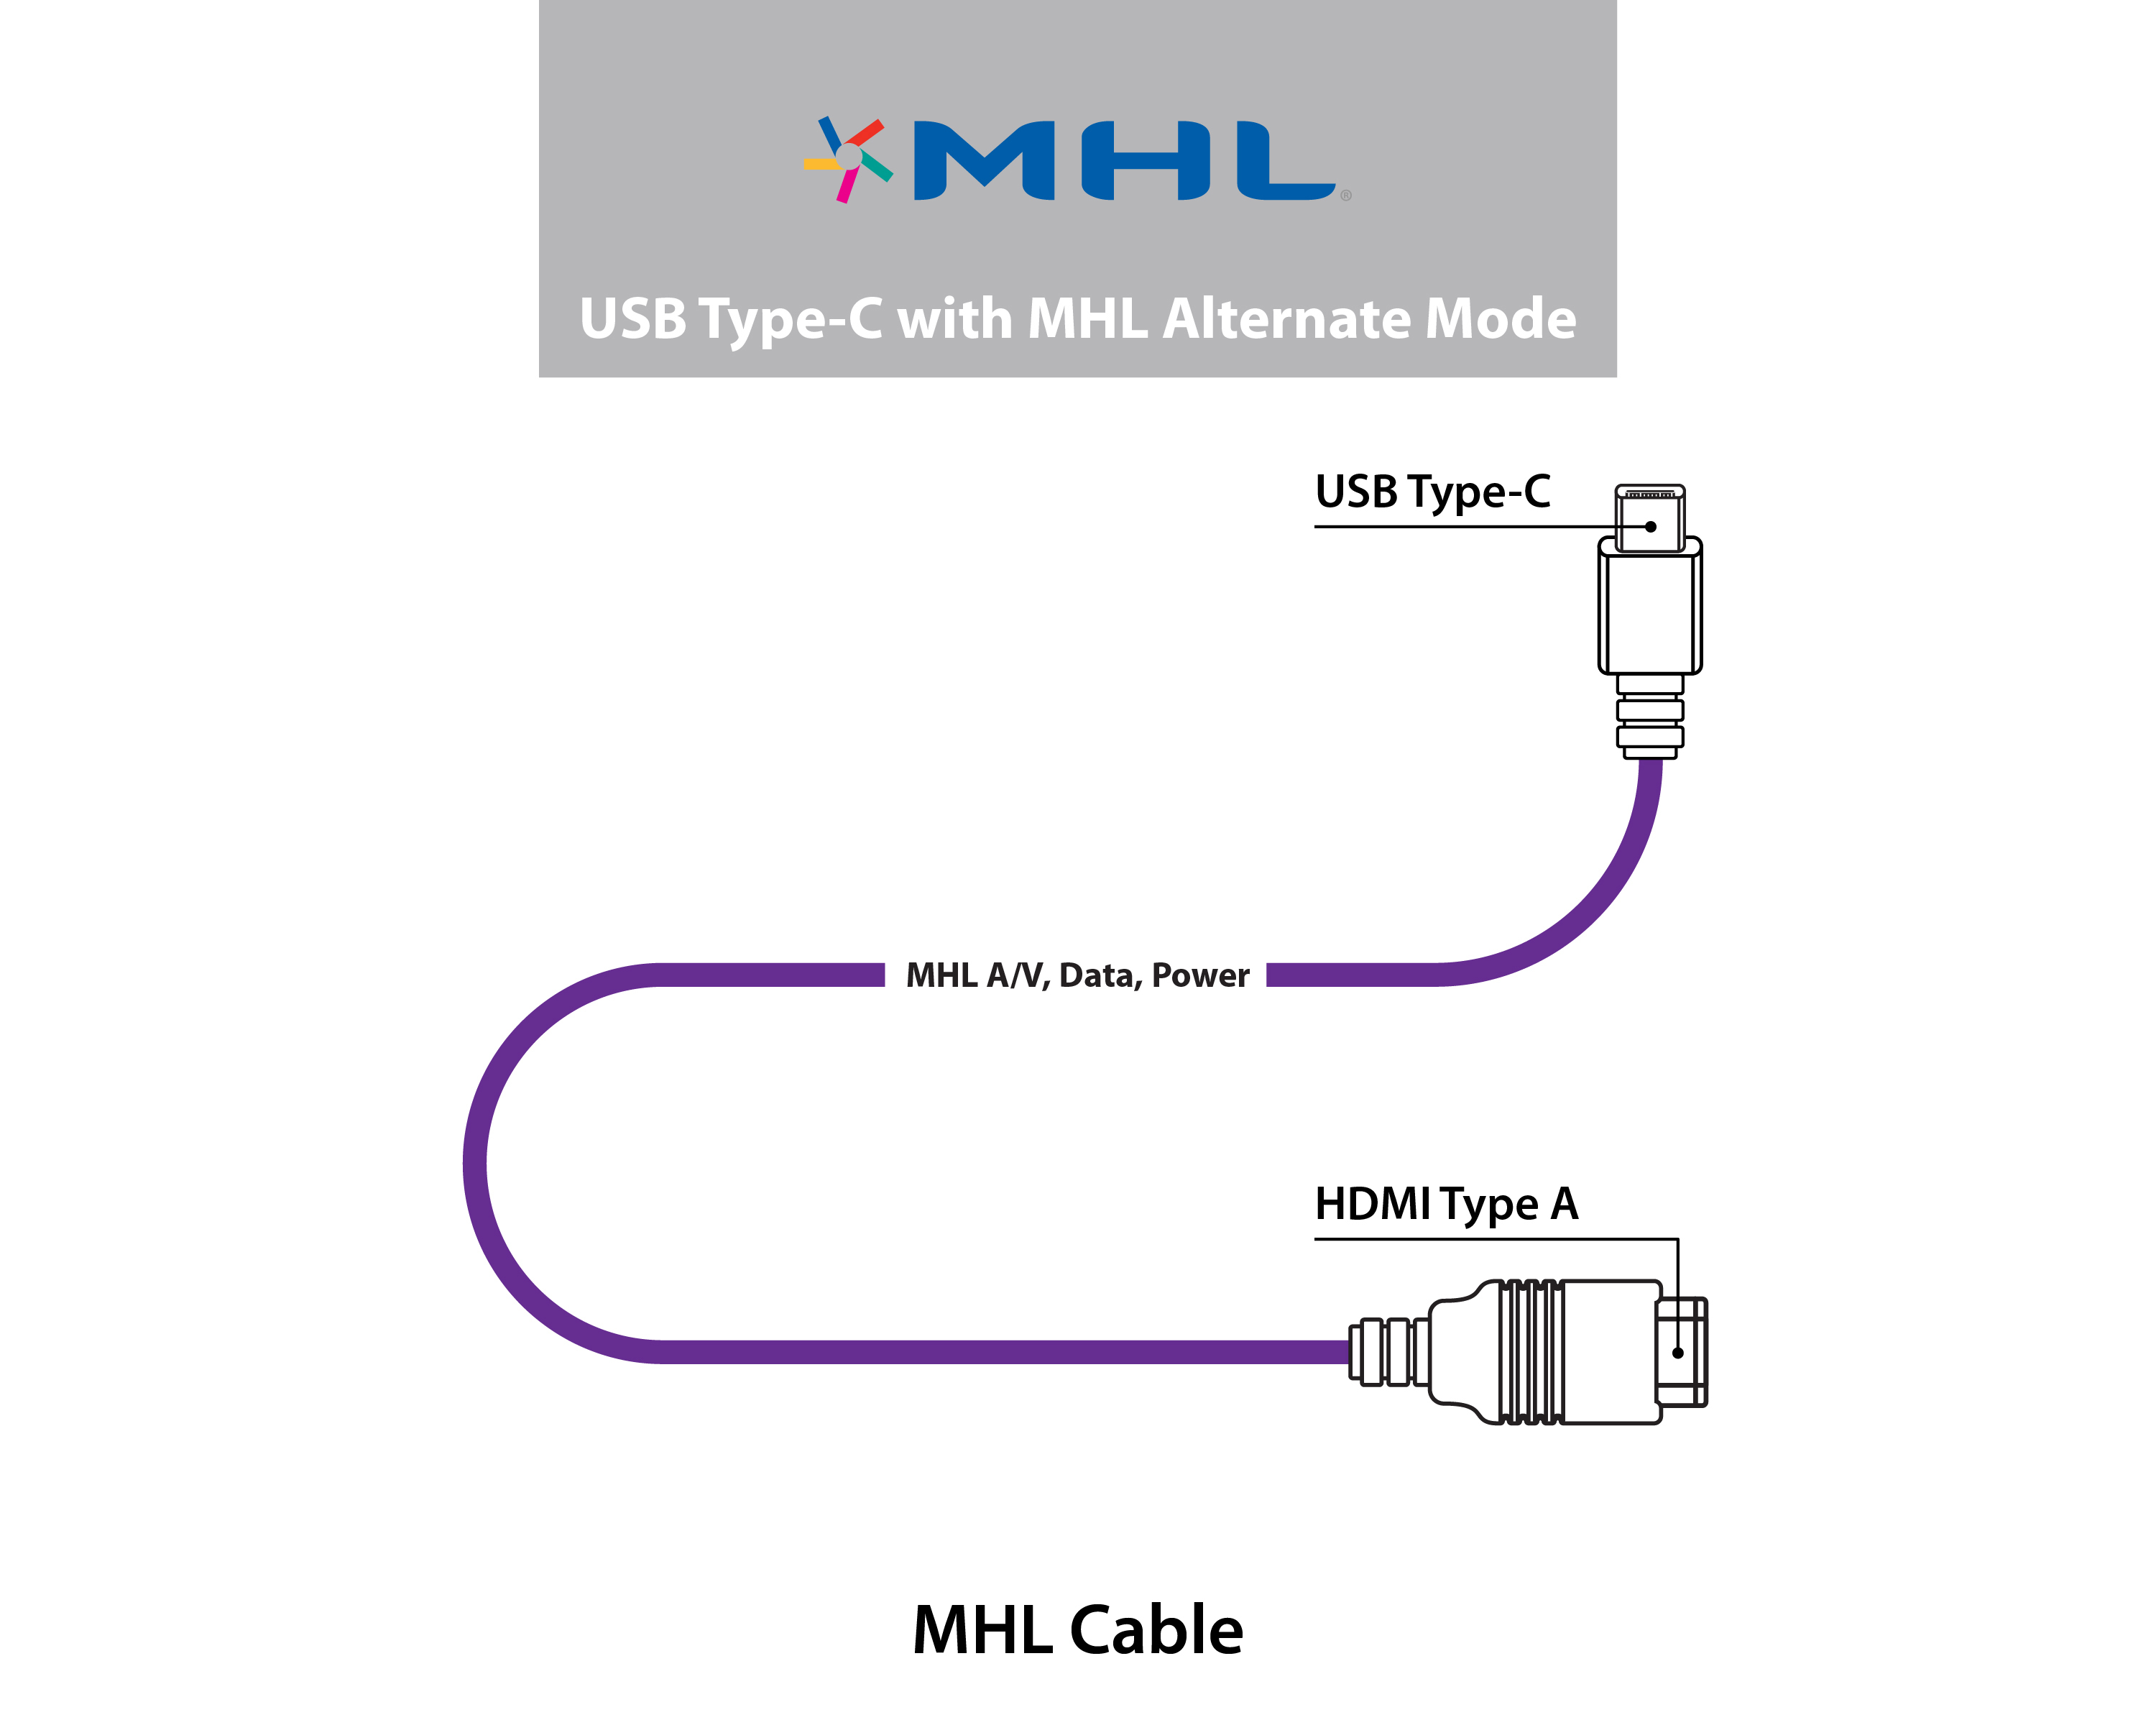 Kloster vanter Lokomotiv MHL Releases Alternate Mode for New USB Type-C Connector | Business Wire